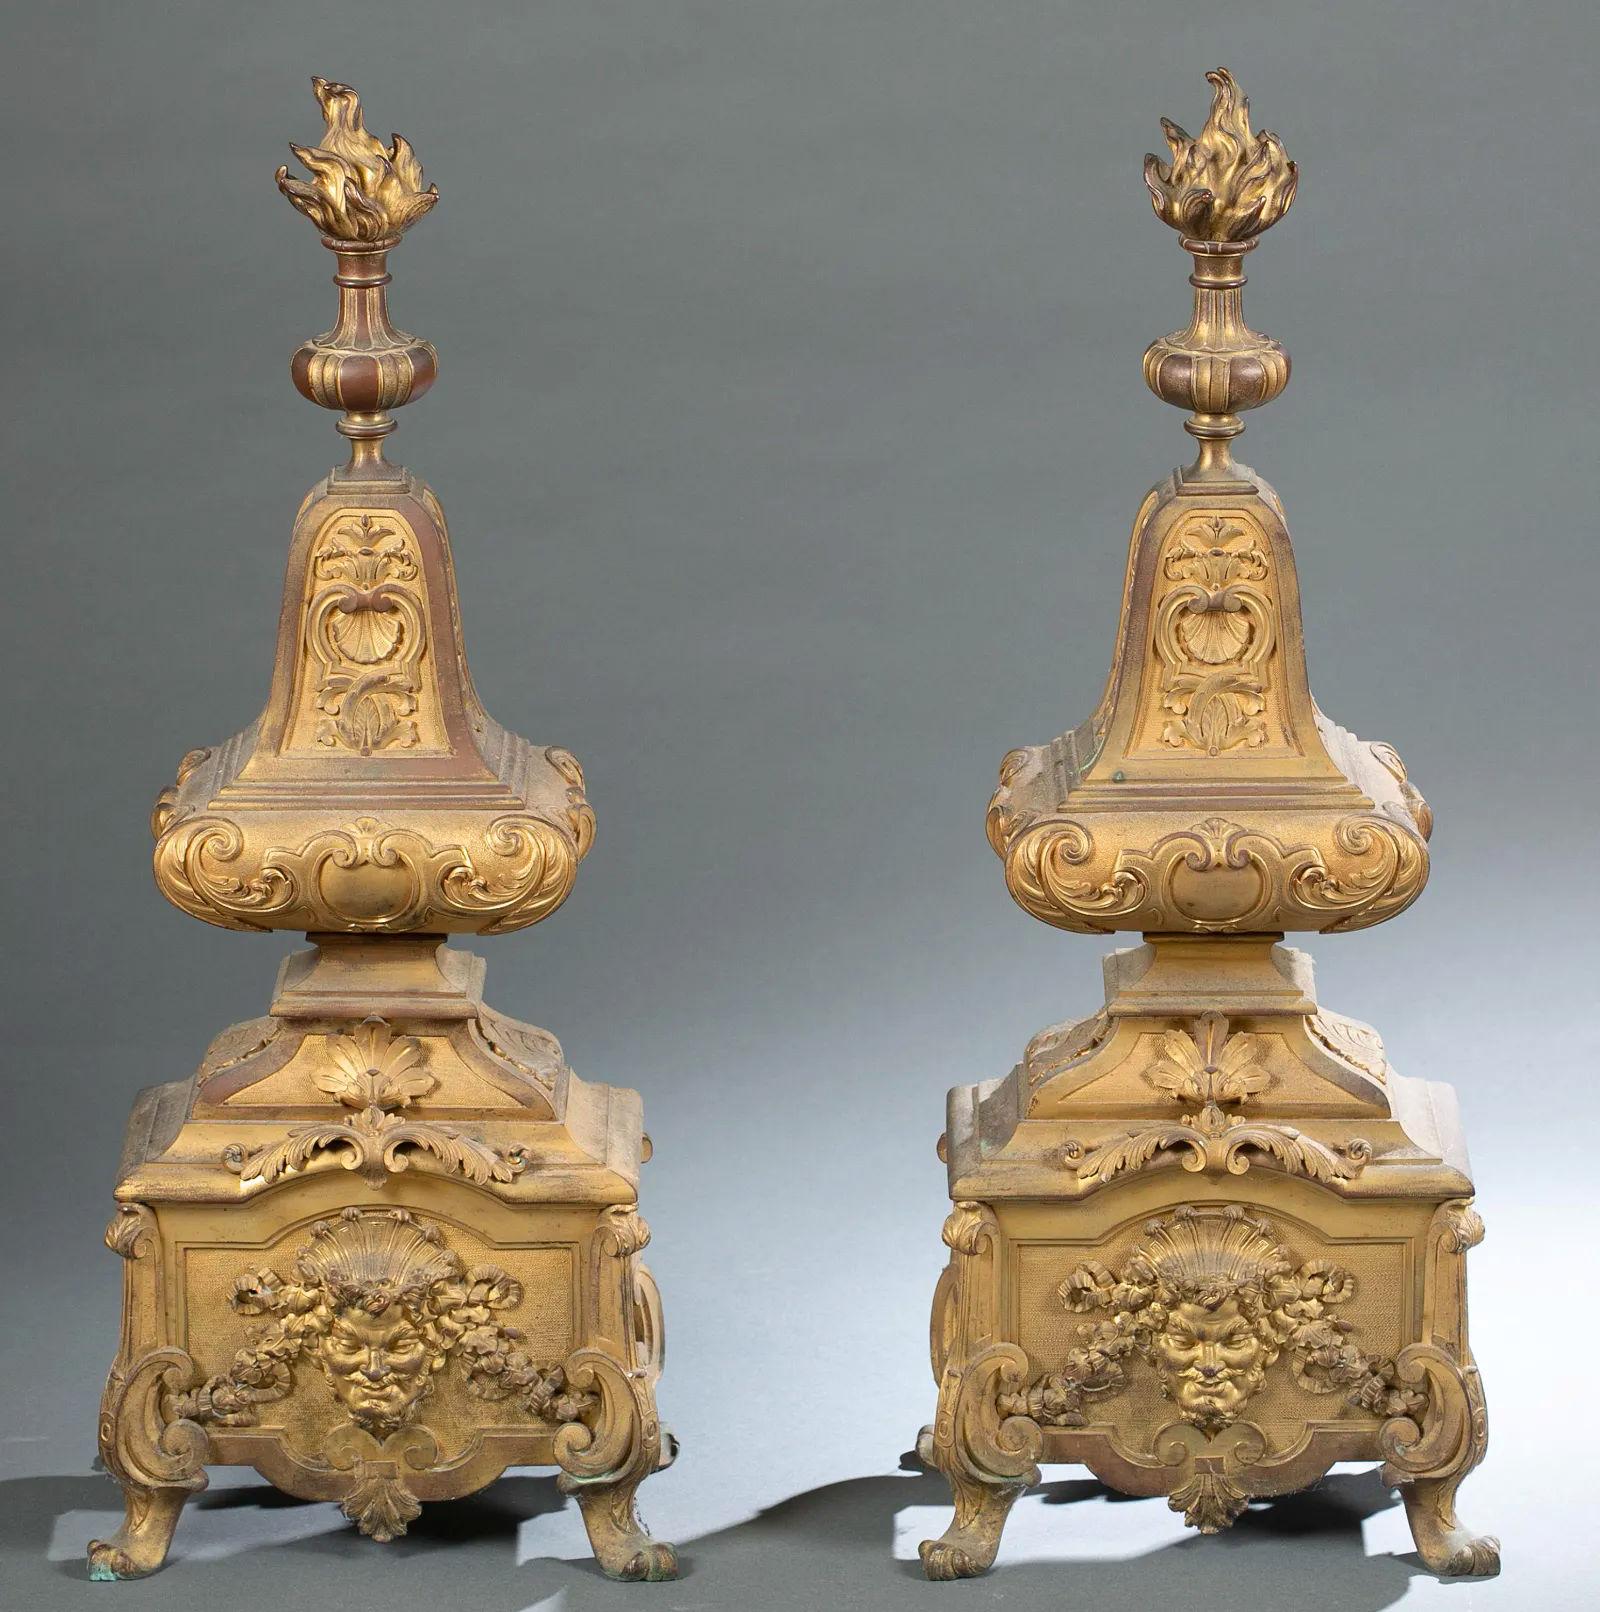 Pair of large and  finest quality French 19 century  Regence   Louis XIV/XV Style Gilt Bronze Andirons.
